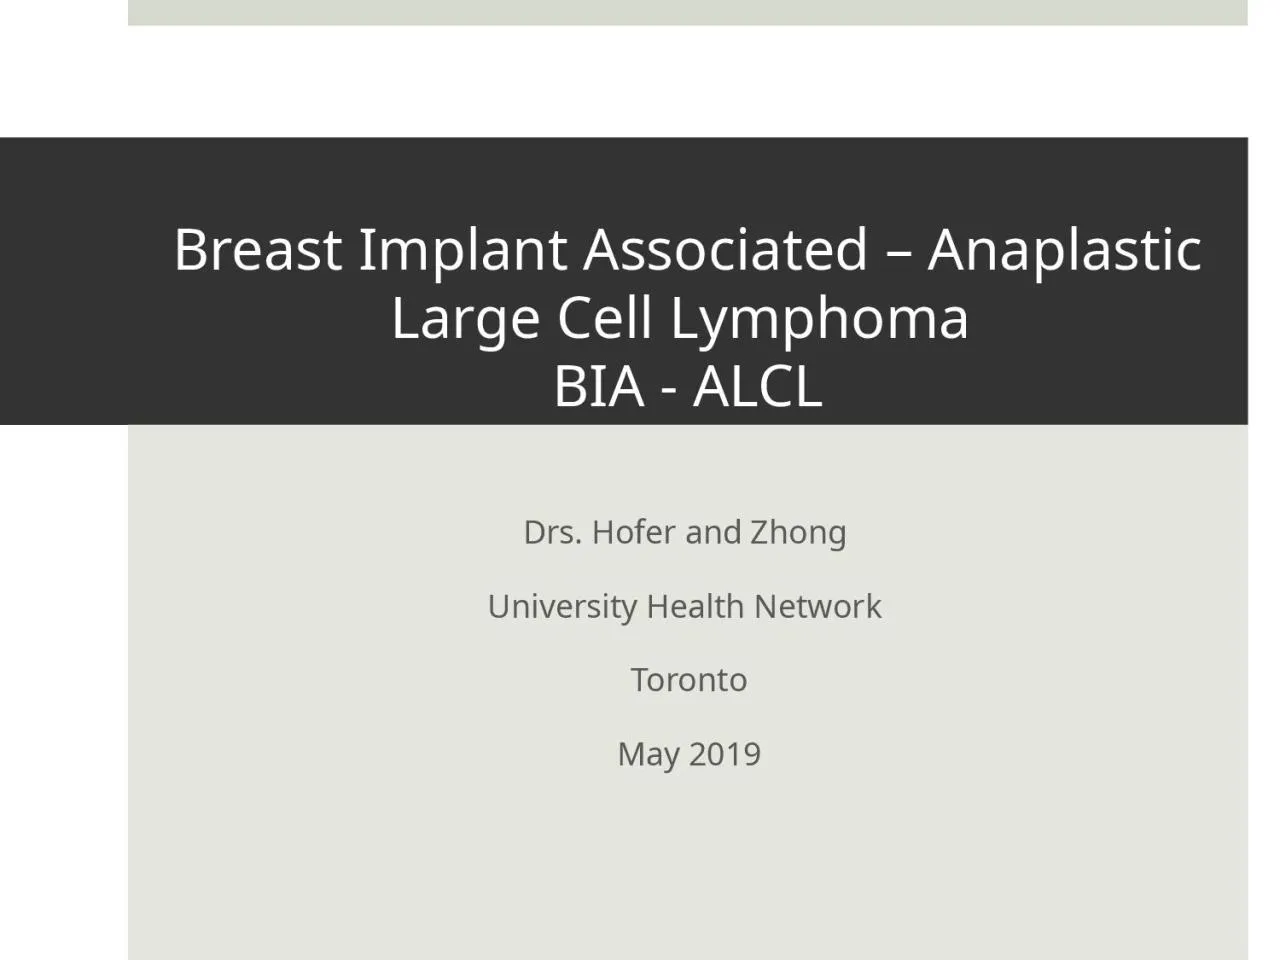 Breast Implant Associated – Anaplastic Large Cell Lymphoma